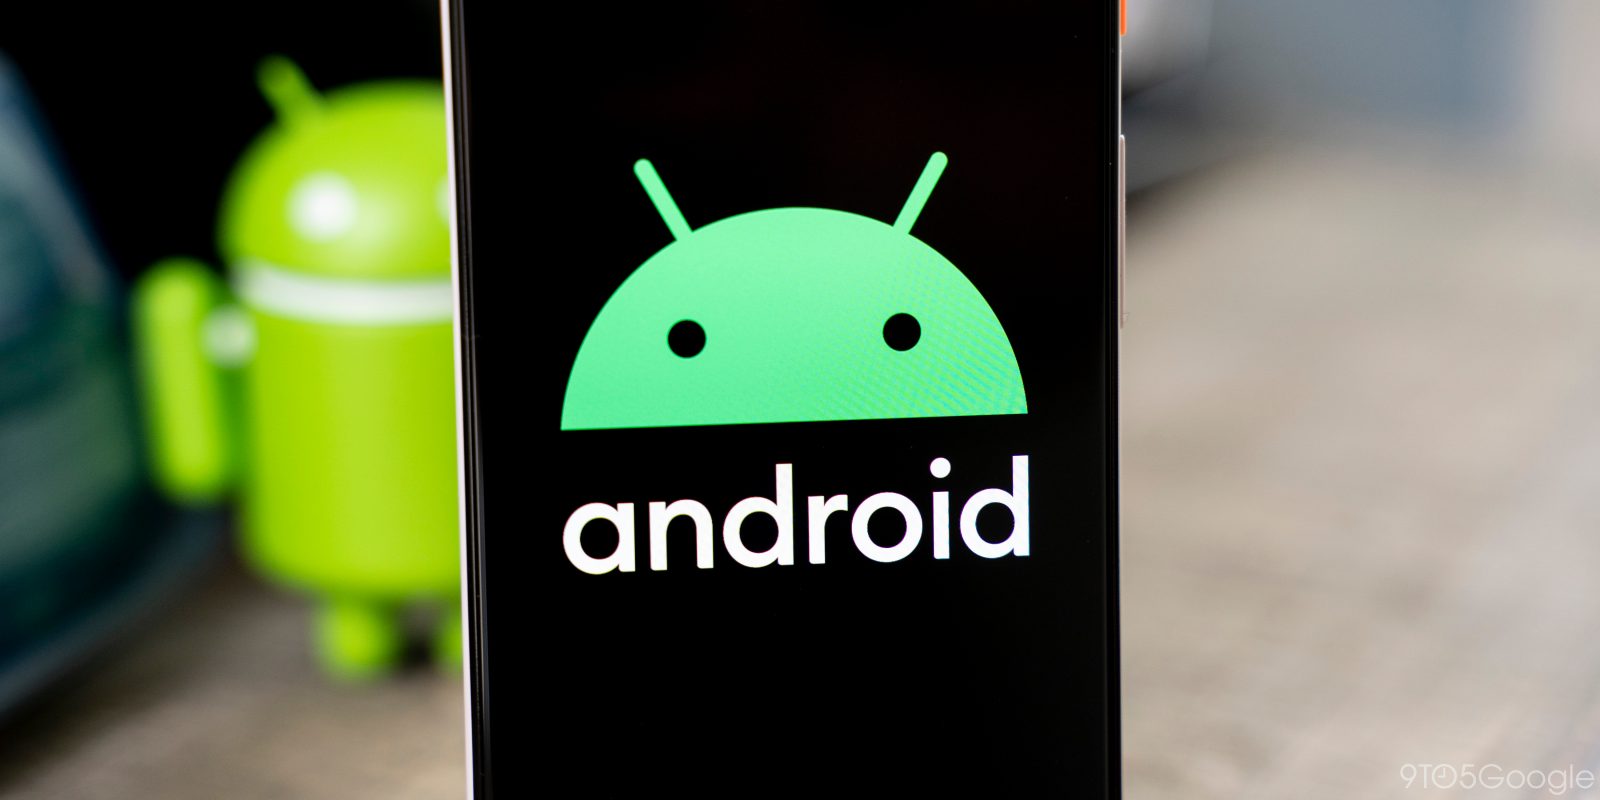 Android 2019 logo